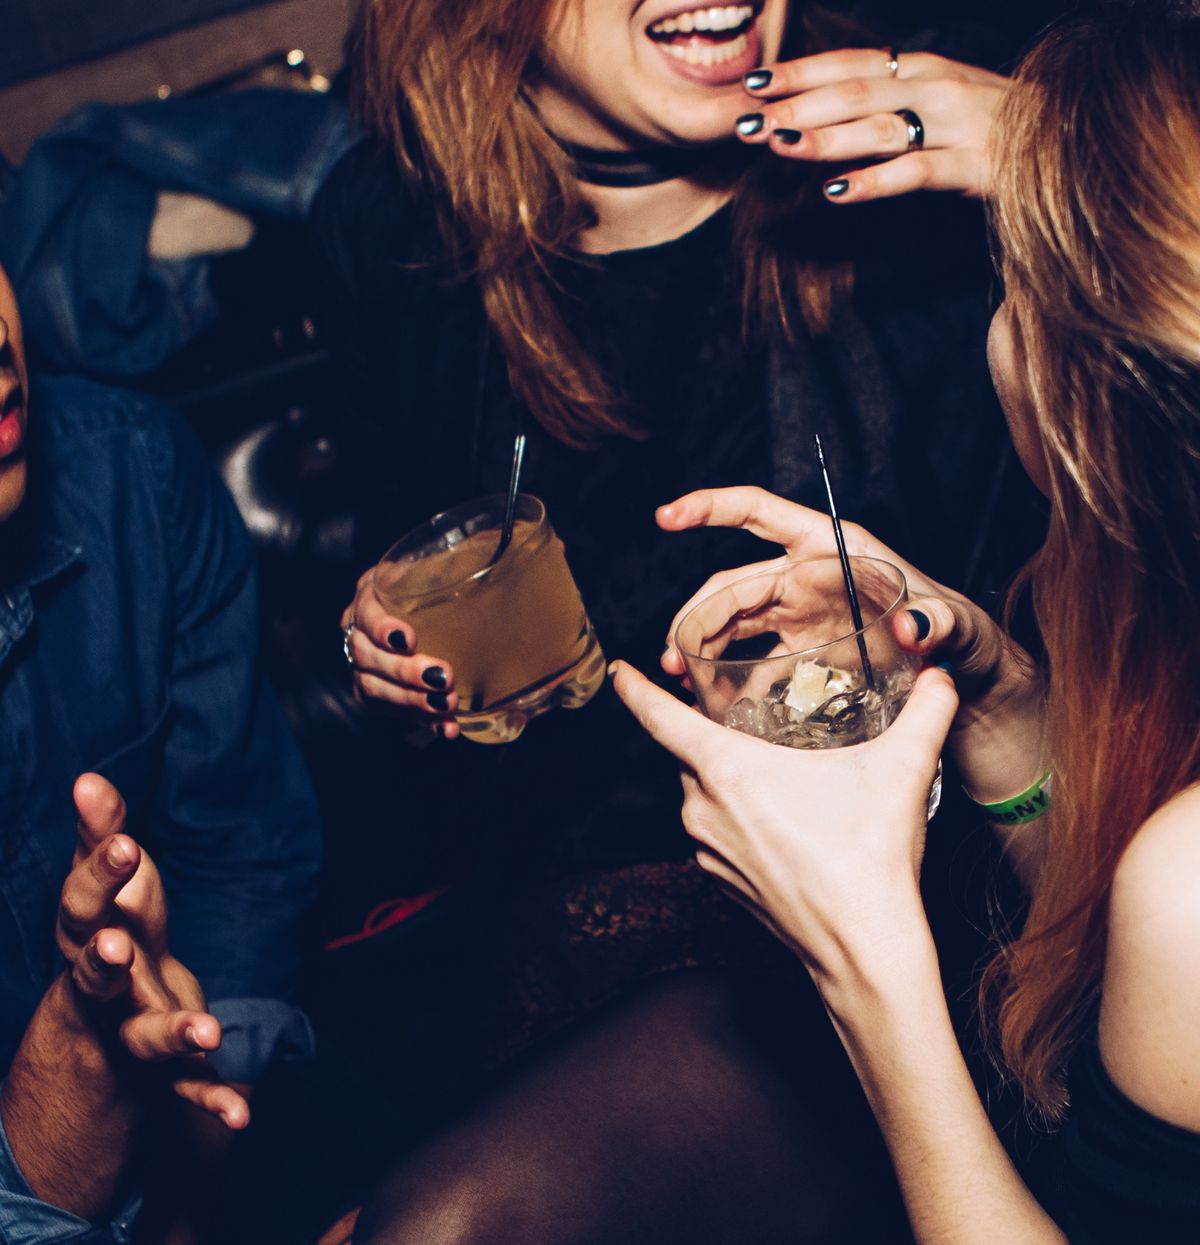 9 Safety Aspects Of A Girls' Night Out That Proves It's Not All Tequila Shots And Instagram Photos